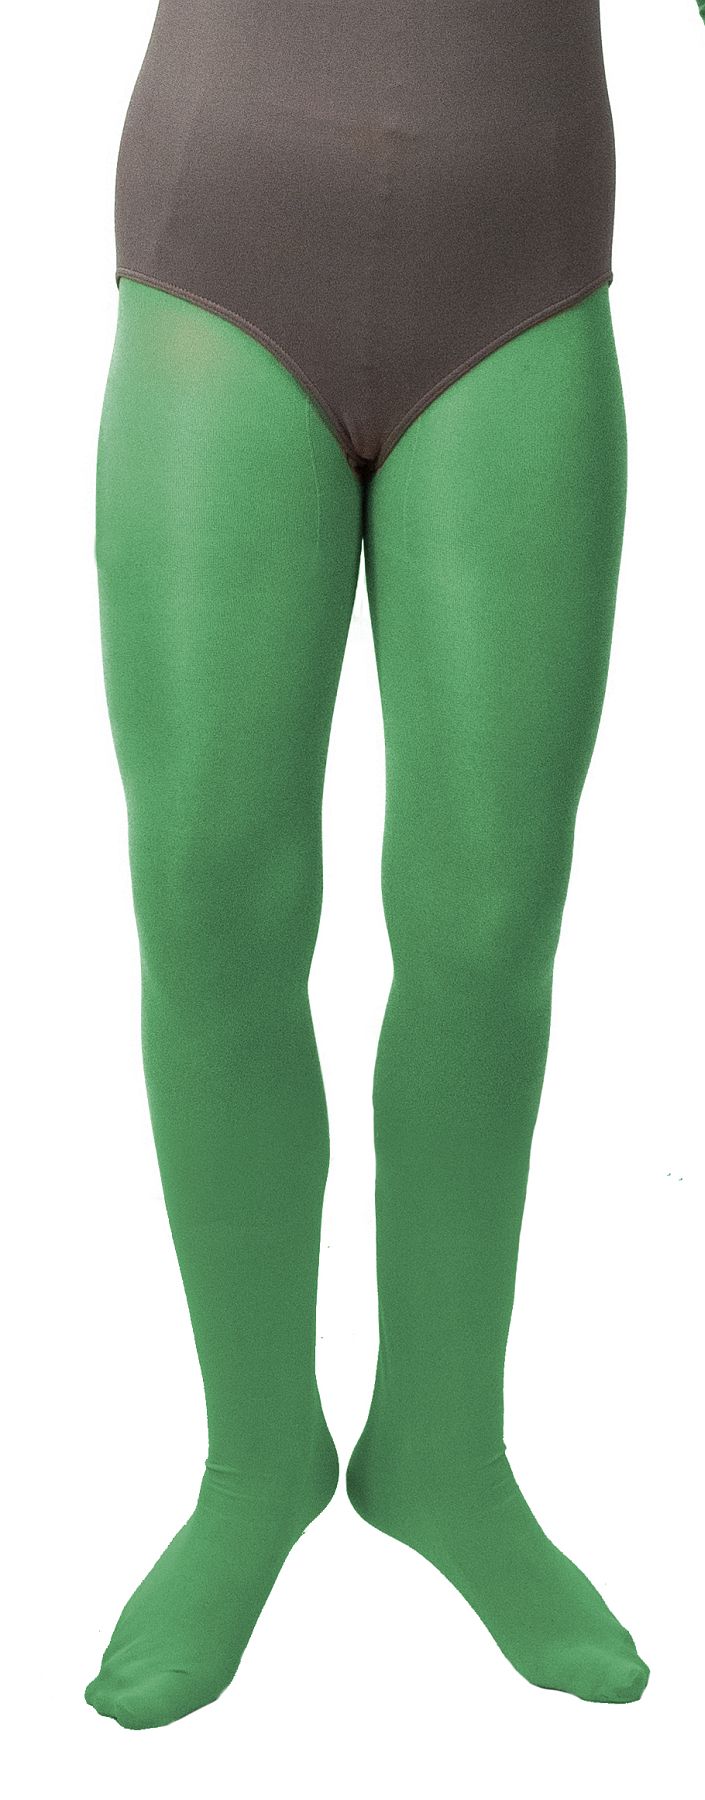 Opaque tights, green